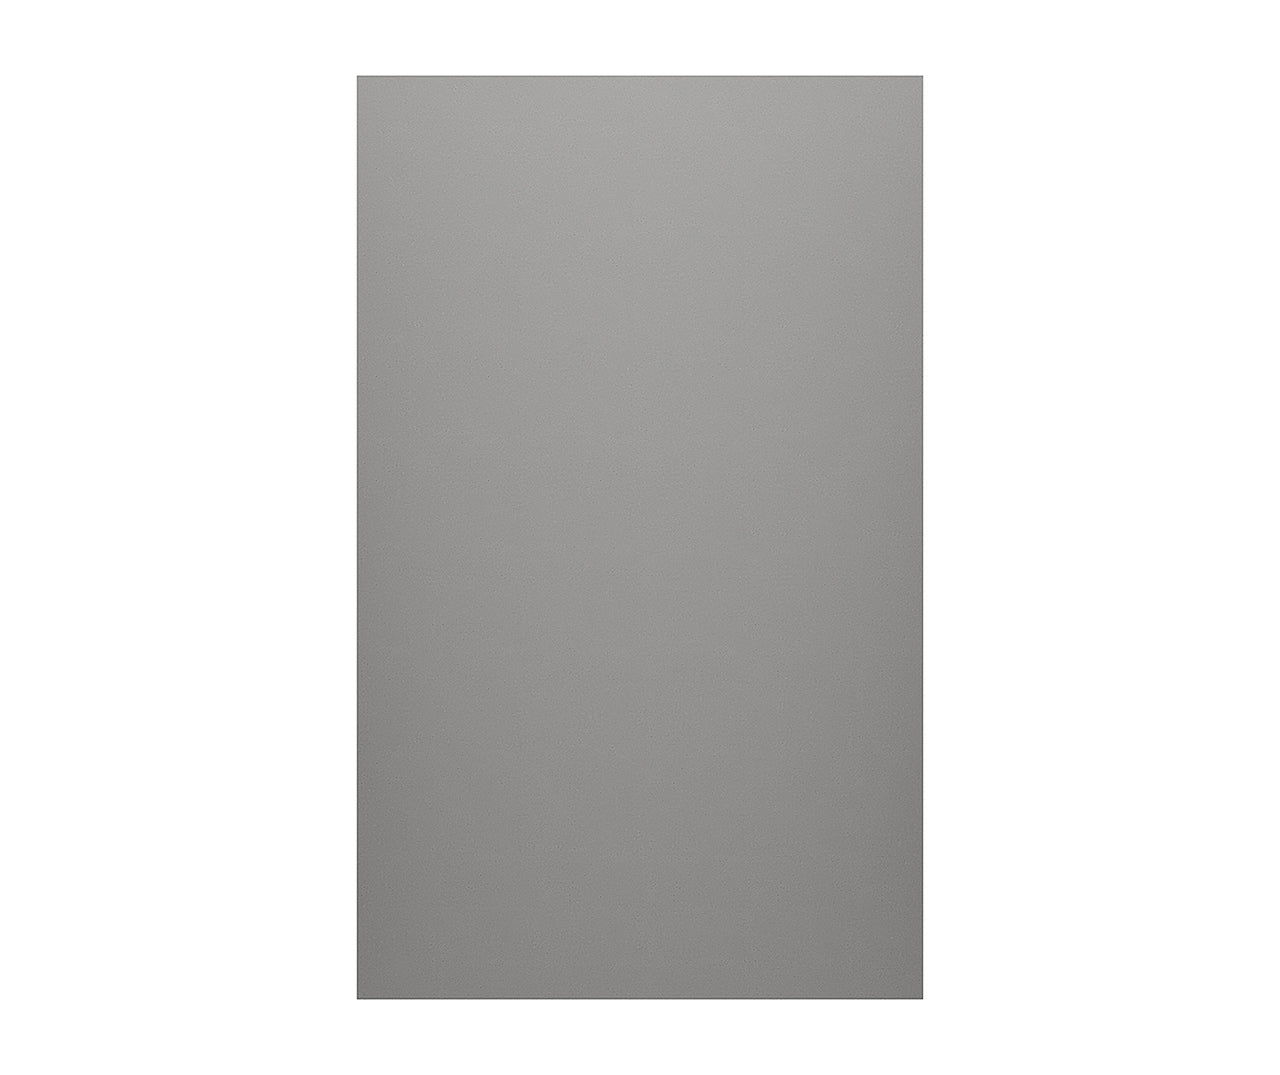 SS-3672-2 36 x 72 Swanstone Smooth Glue up Bathtub and Shower Single Wall Panel in Ash Gray